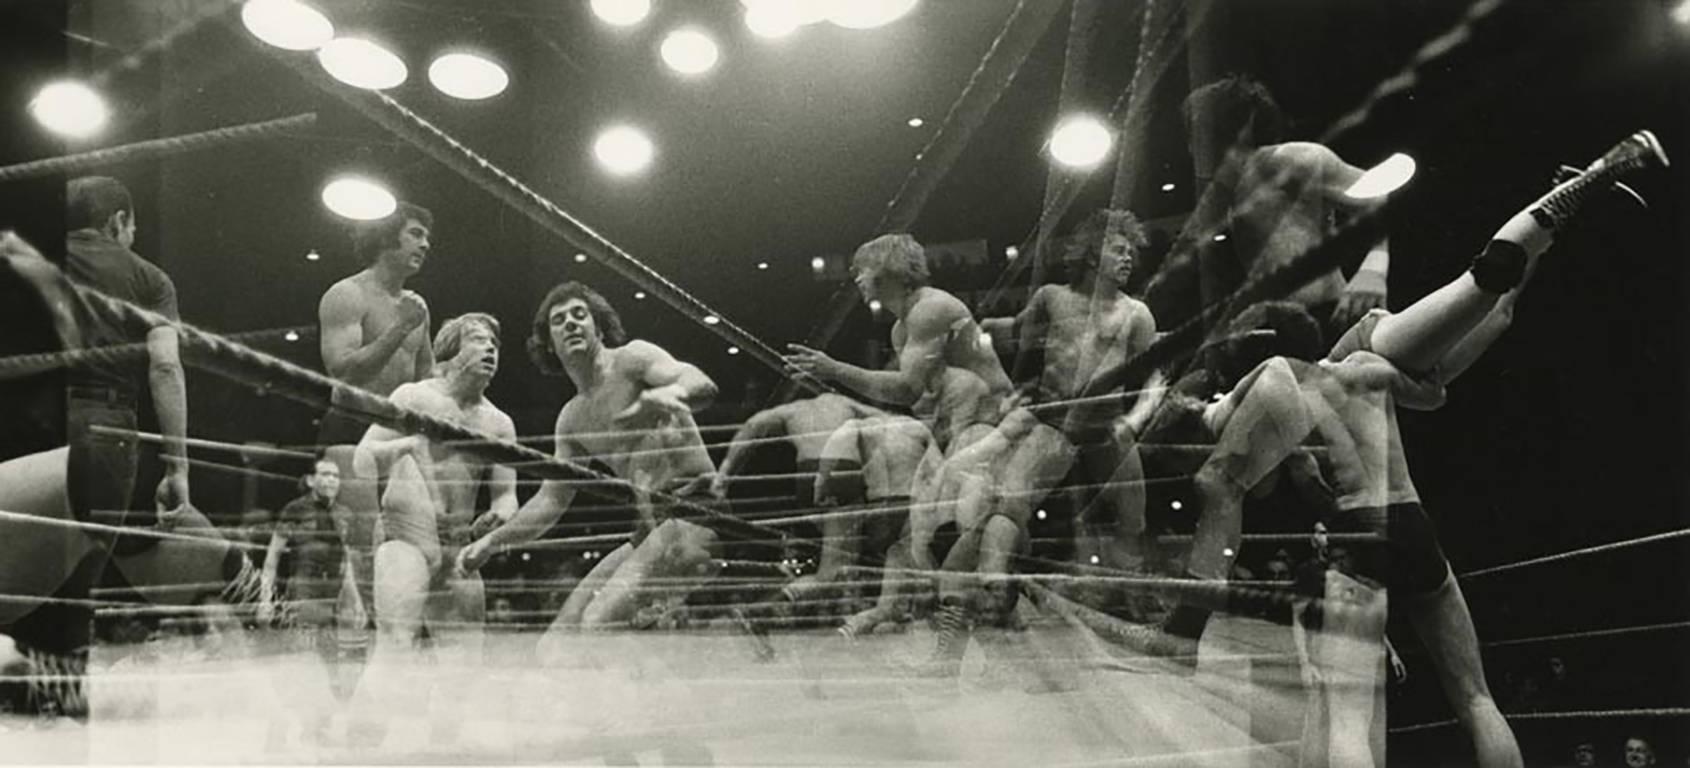 Wrassle Mania, 1975, Multi-Exposure Black and White Photograph, Framed, Signed